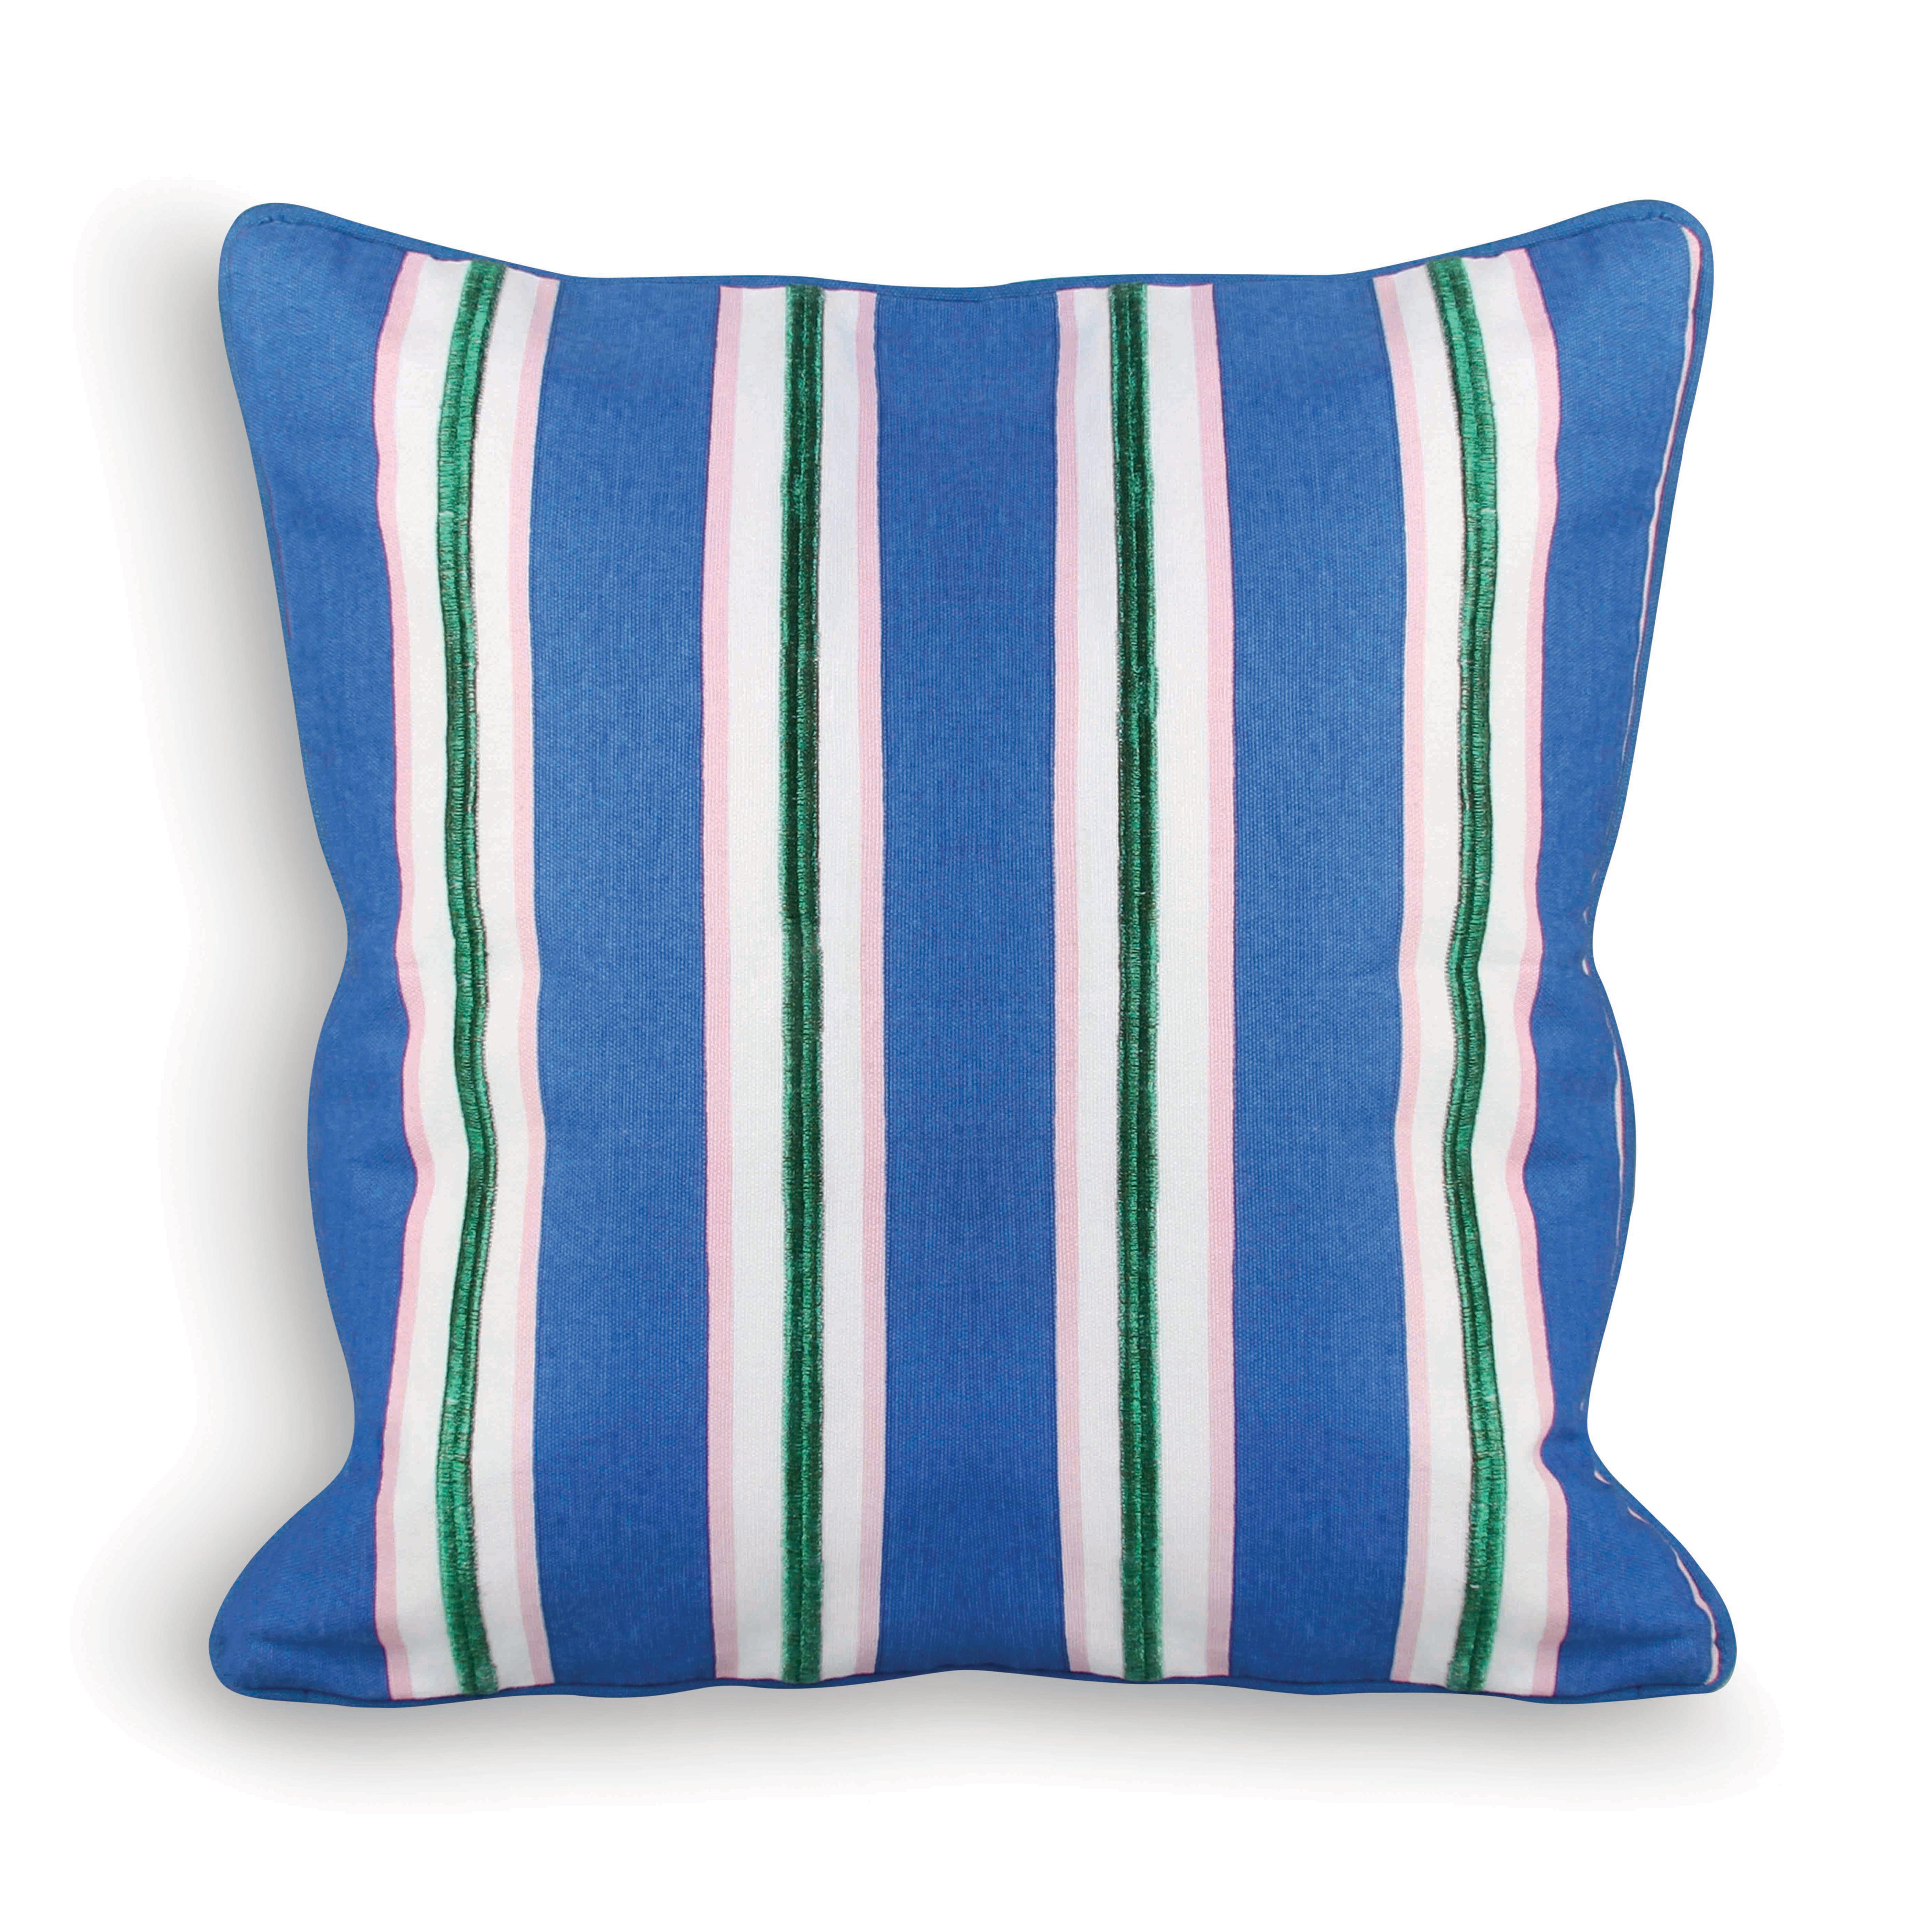 BLUE PRINTED & EMBROIDERED STRIPED CUSHION